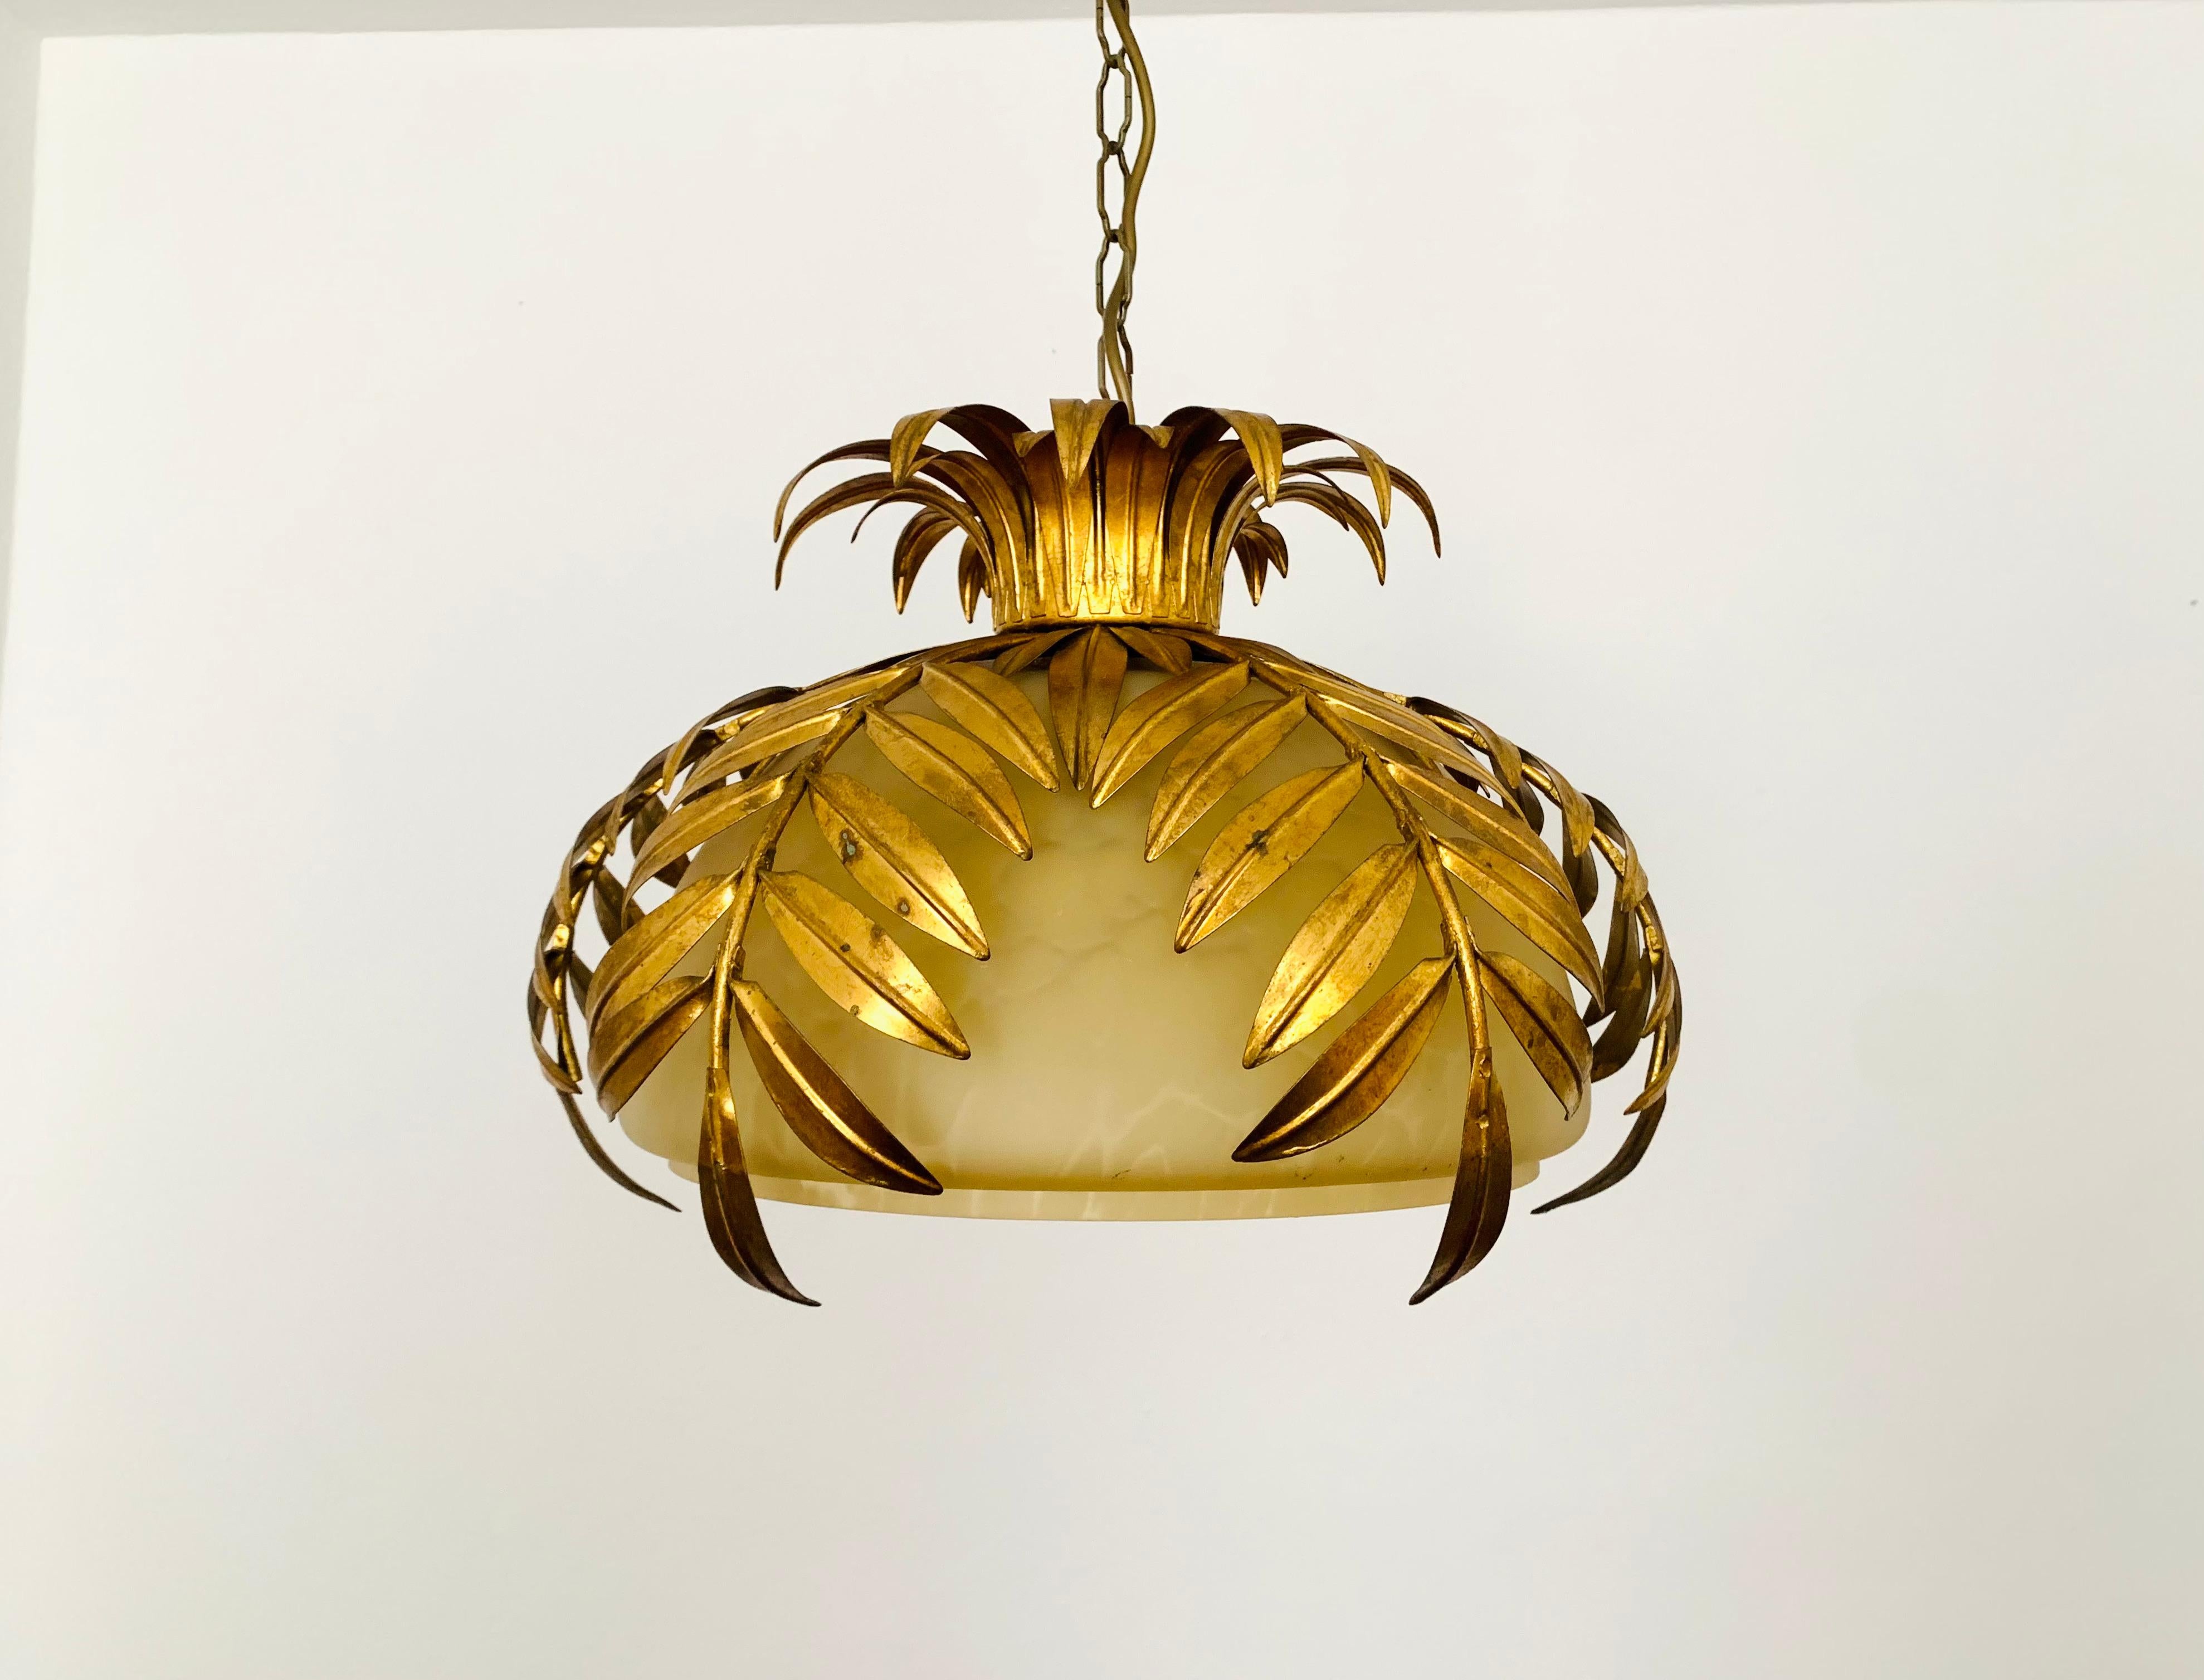 Exceptionally decorative Pendant lamp from the 1970s.
Great design and high quality.
The golden leaves and the patterned glass create a very noble light.

Design: Hans Kögl

Condition:

Very good vintage condition with clear age -related signs of